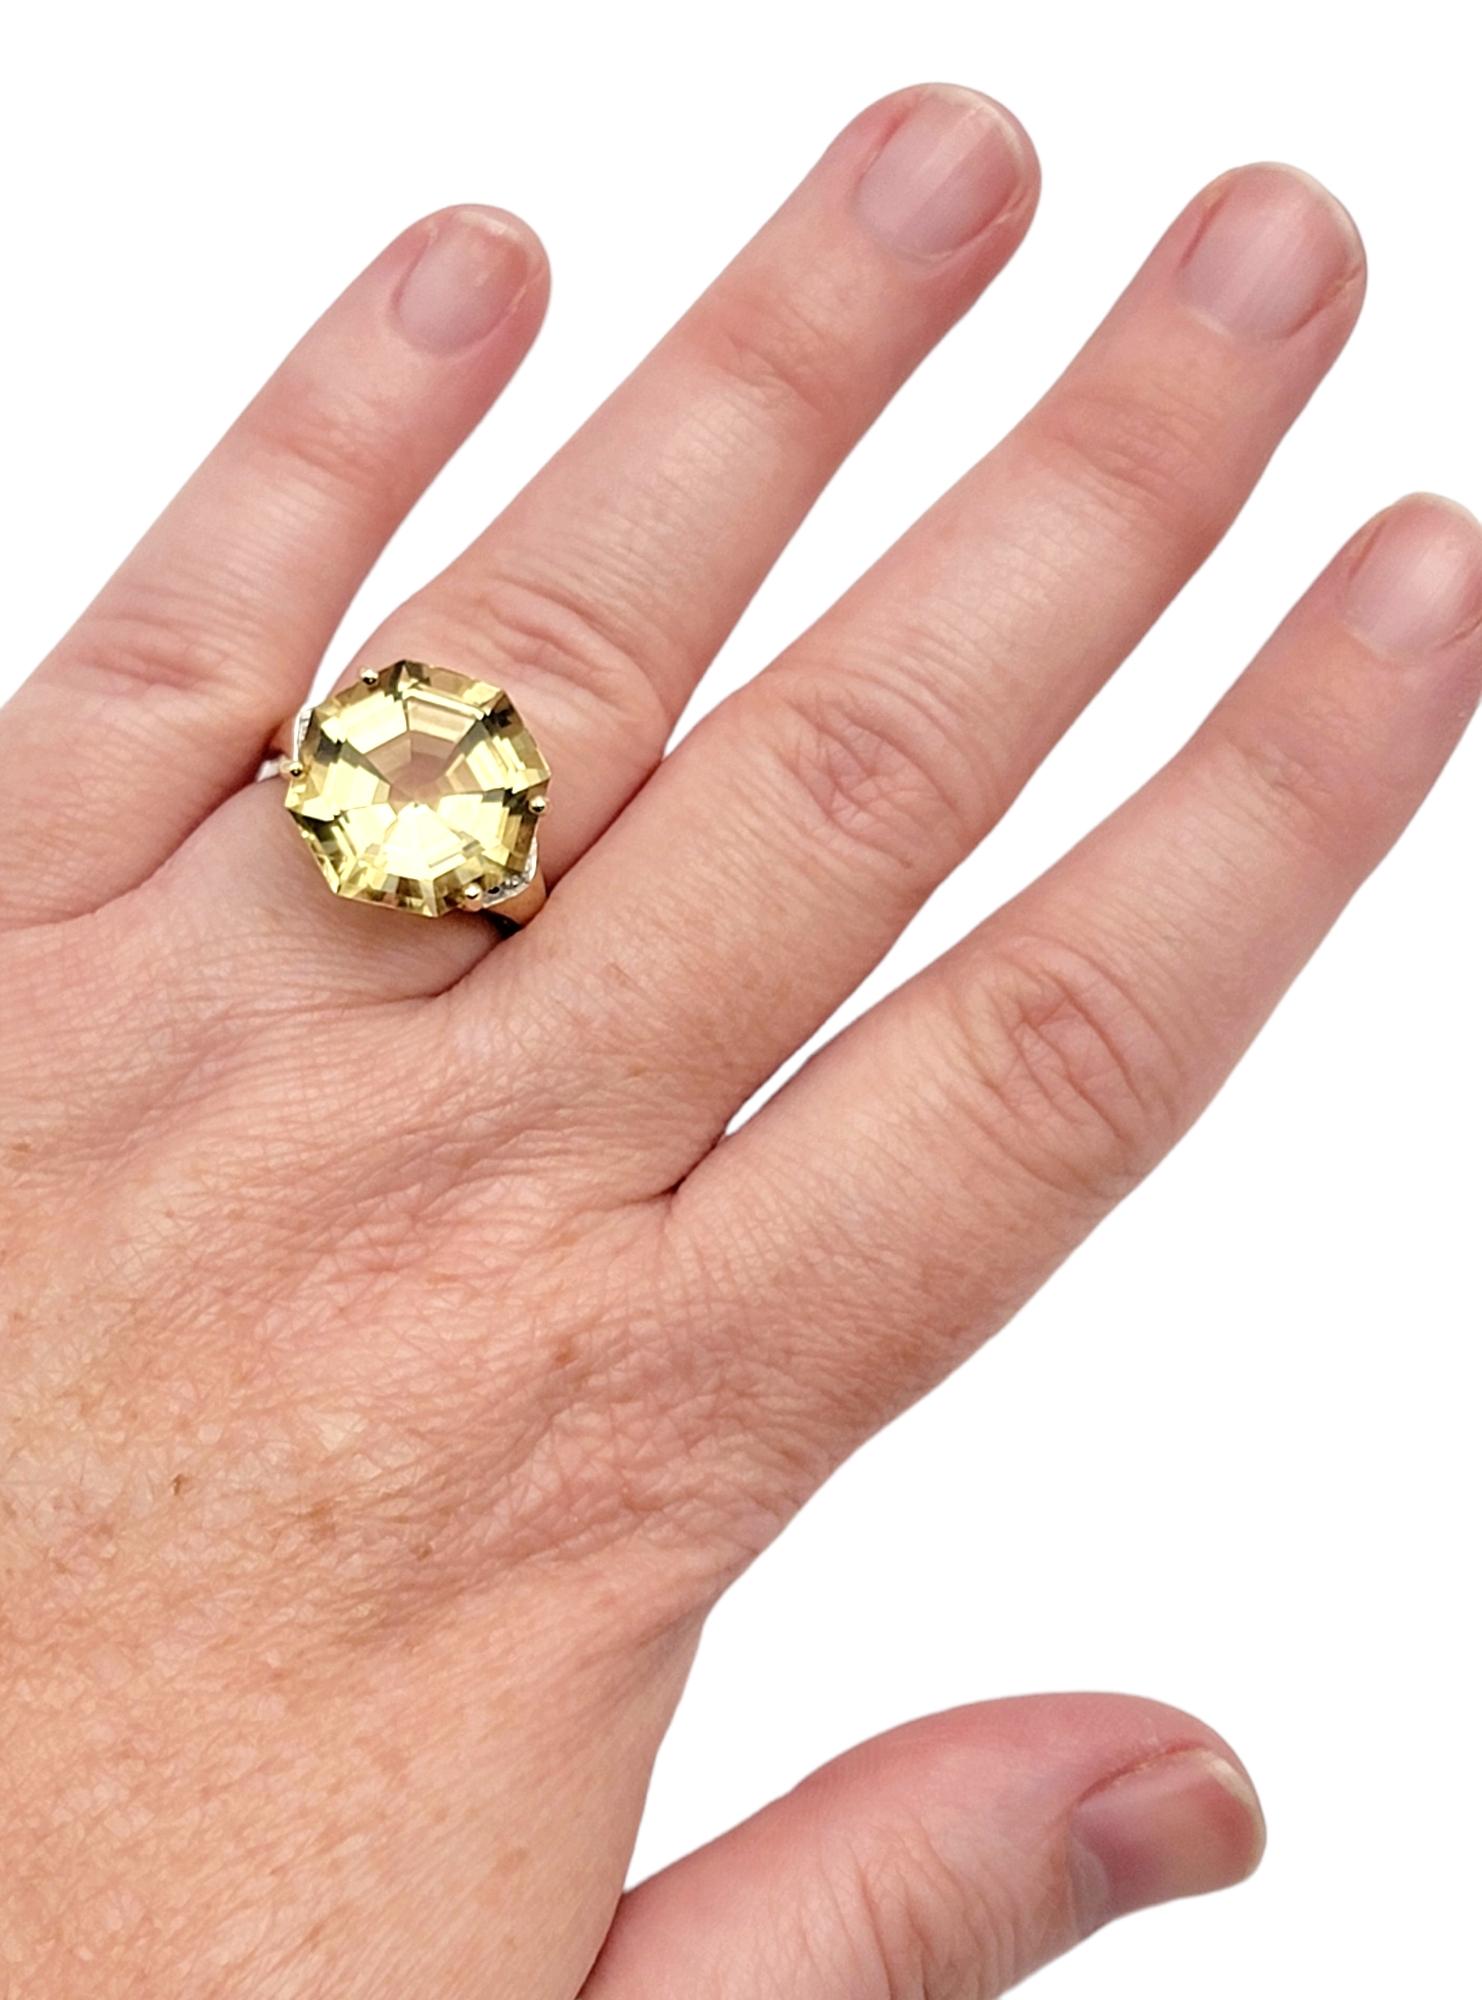 11.55 Carat Octagonal Cut Citrine Solitaire Cocktail Ring with Diamond Accents For Sale 2